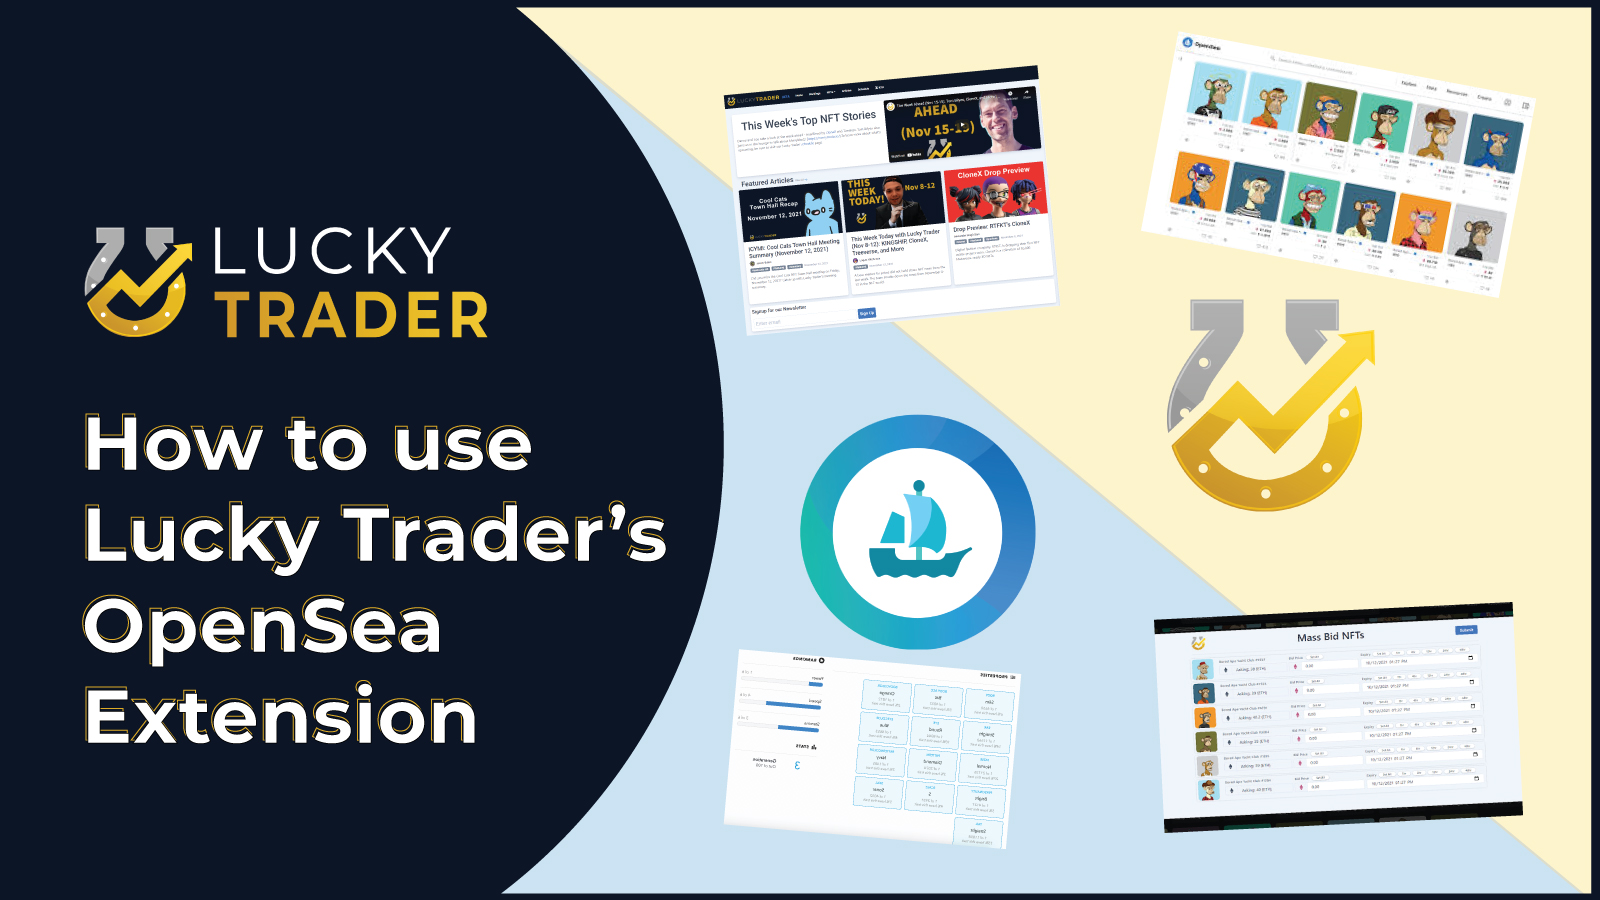 Improve Your OpenSea Experience with Our Lucky Trader Extension